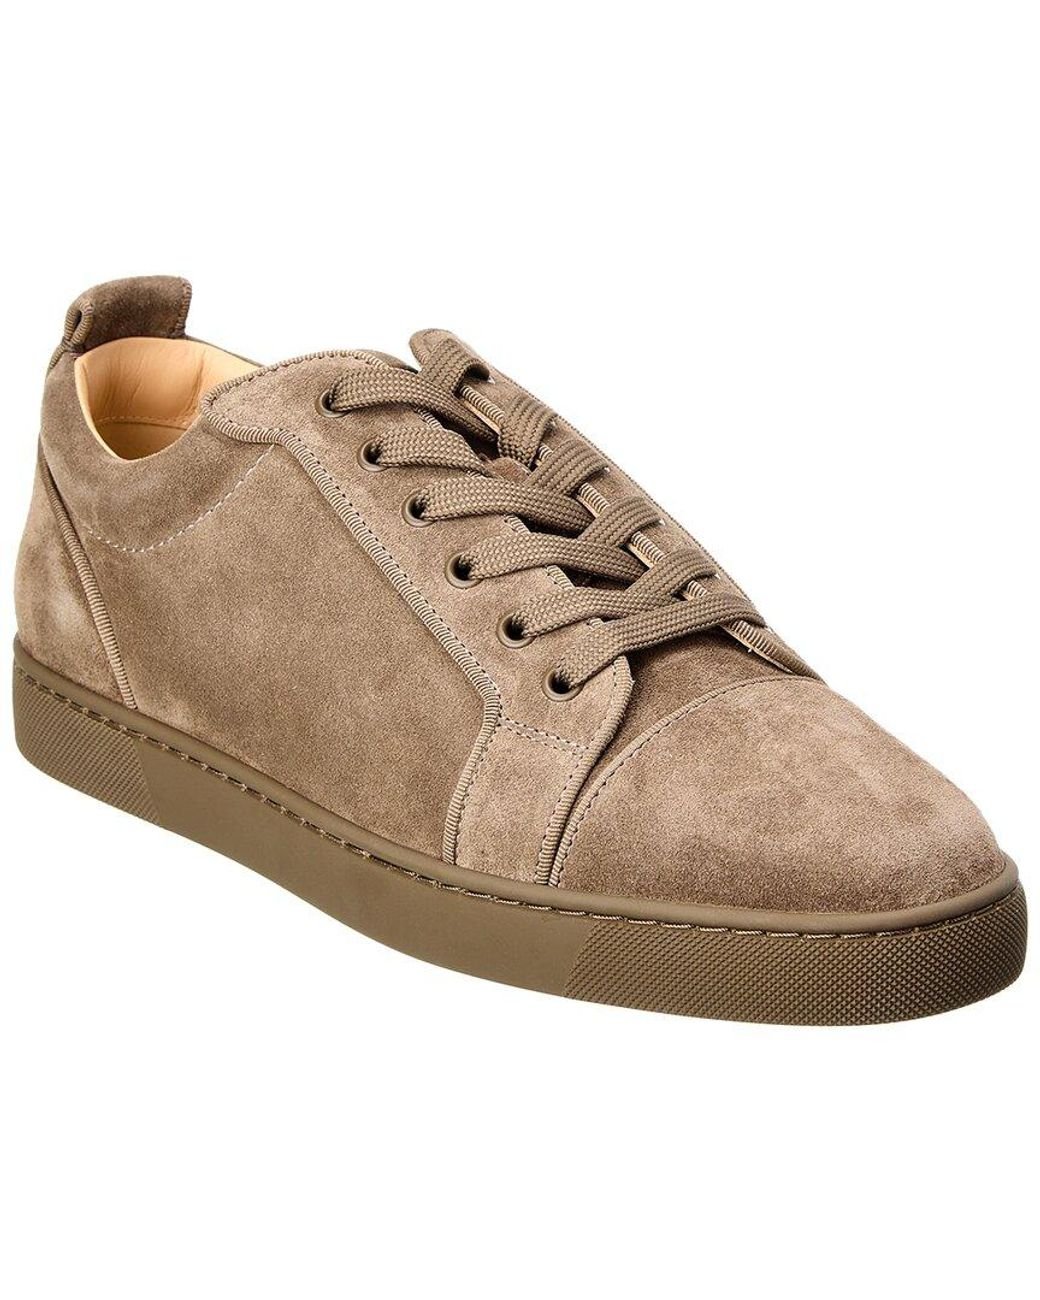 Christian Louboutin Louis Junior Orlato Suede Sneaker in Brown for